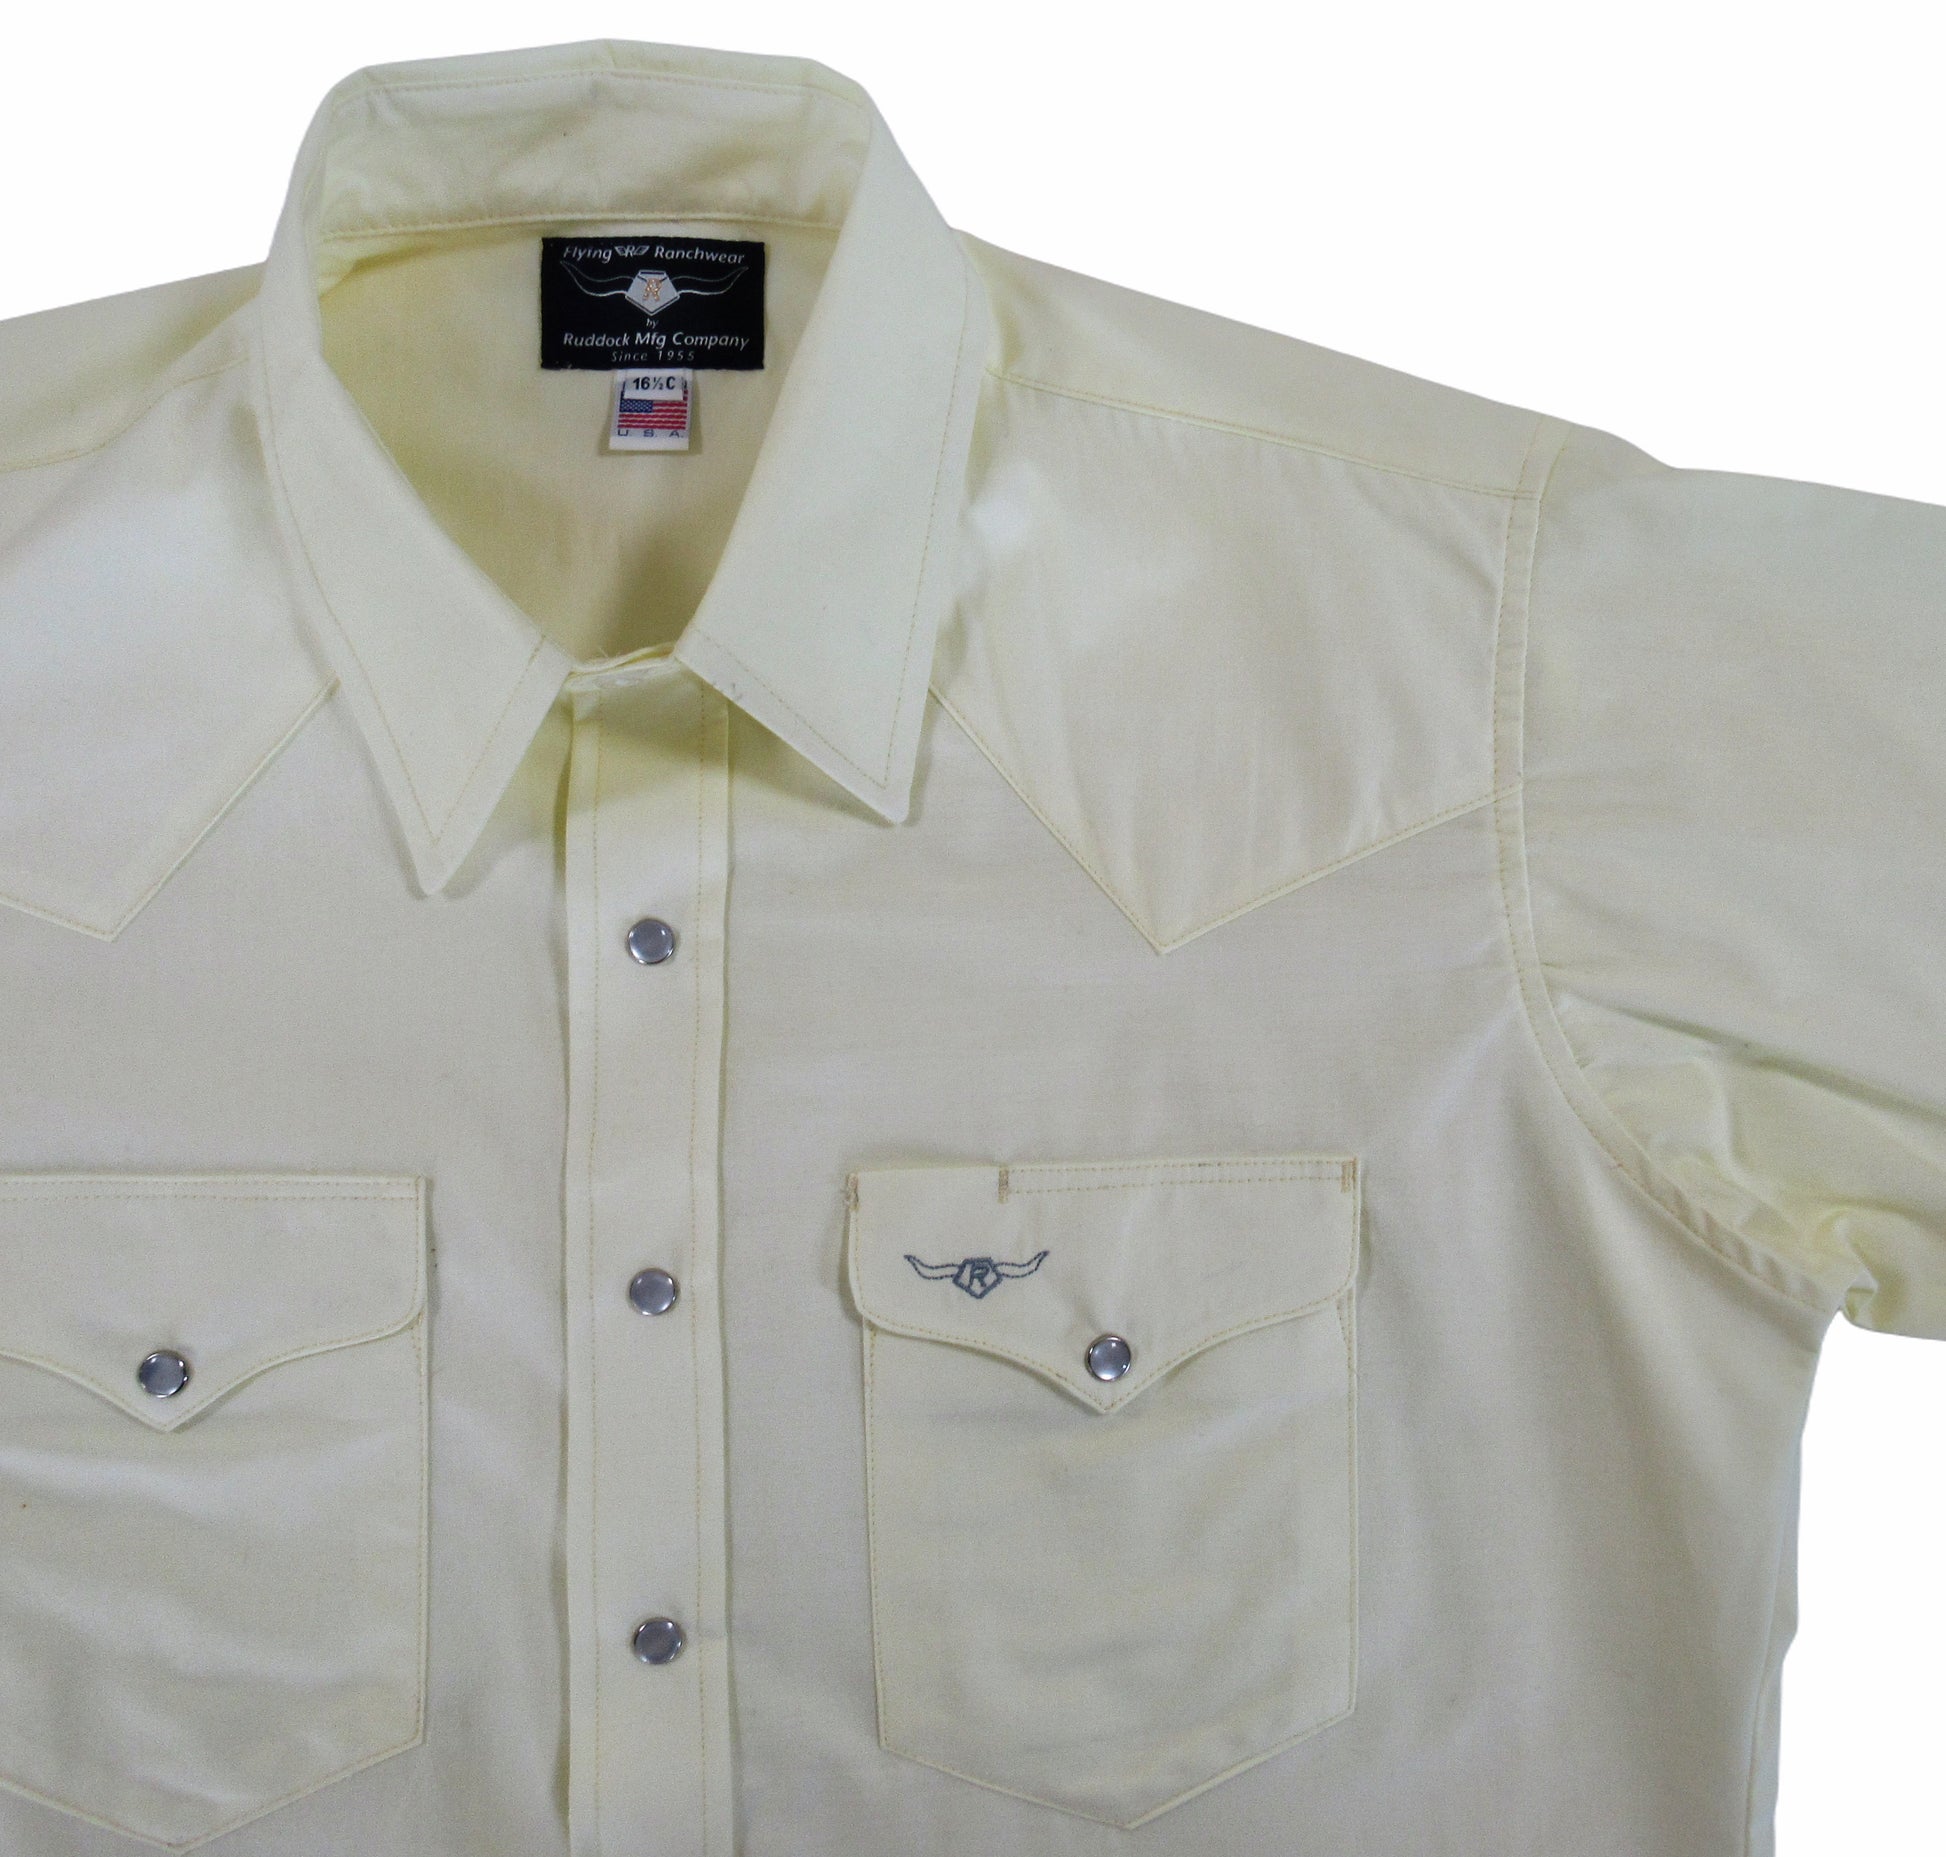 Pale Yellow short sleeve shirt with snaps by Flying R Ranchwear Made in USA